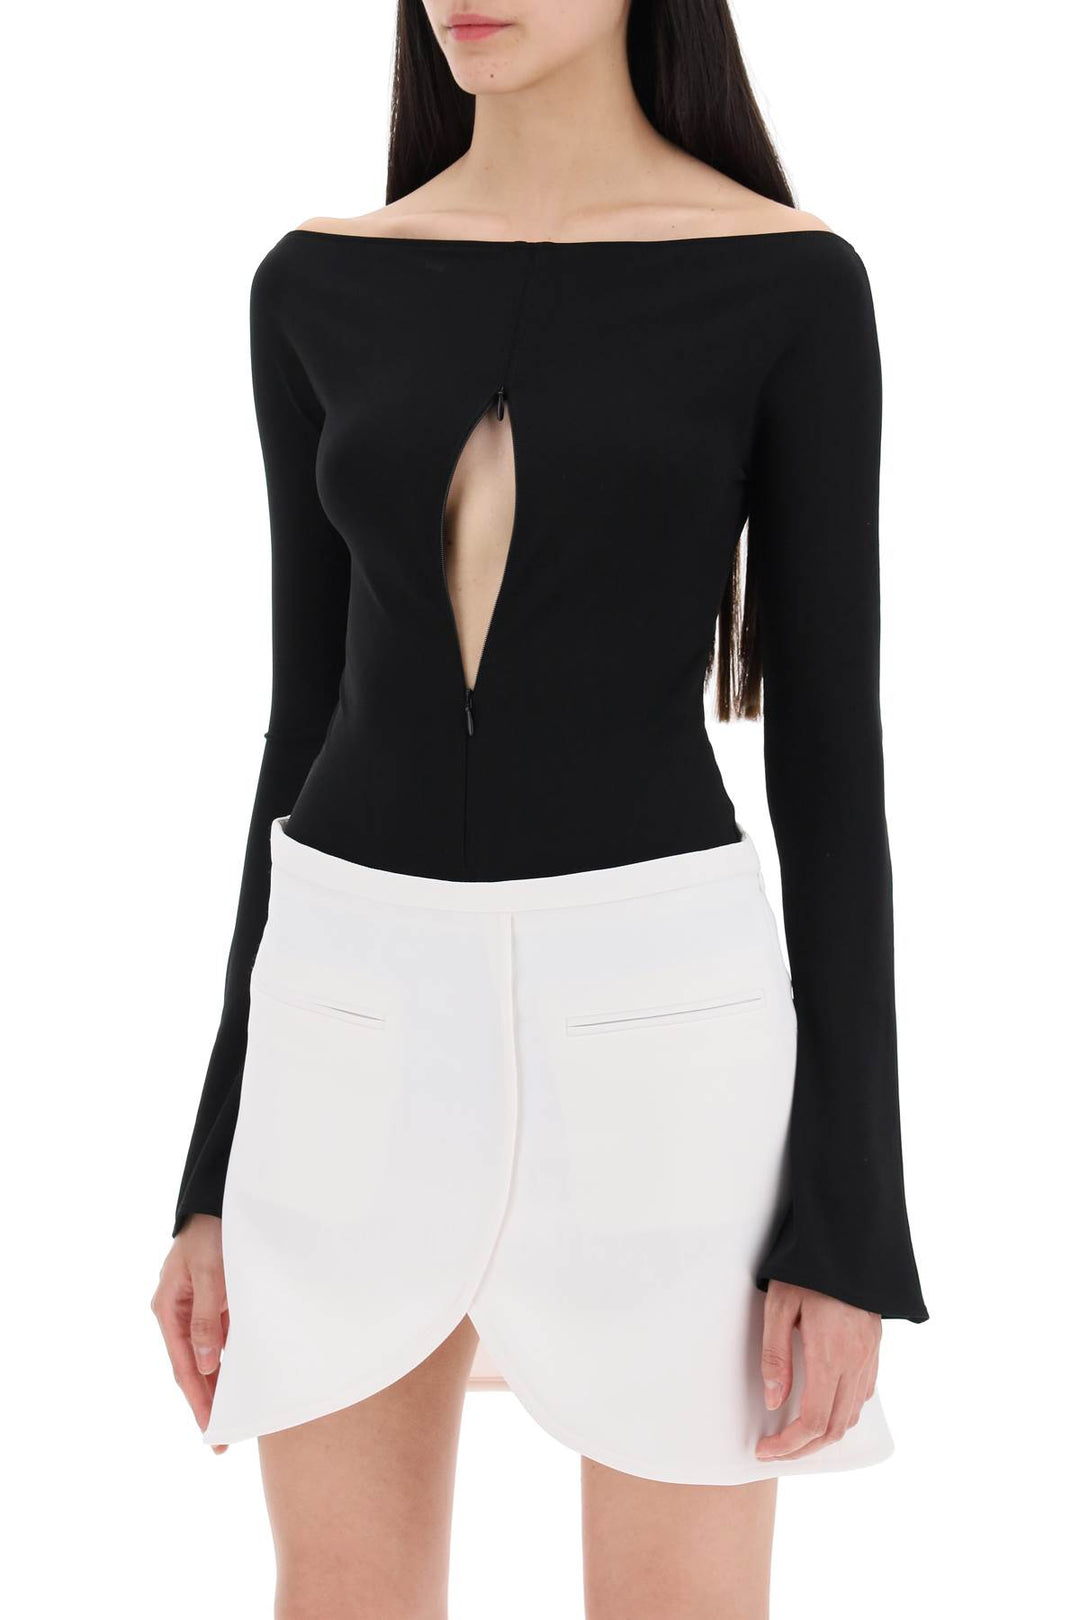 Courreges Replace With Double Quoteinvisible Front Zip Bodycon Dressreplace With Double Quote   Nero